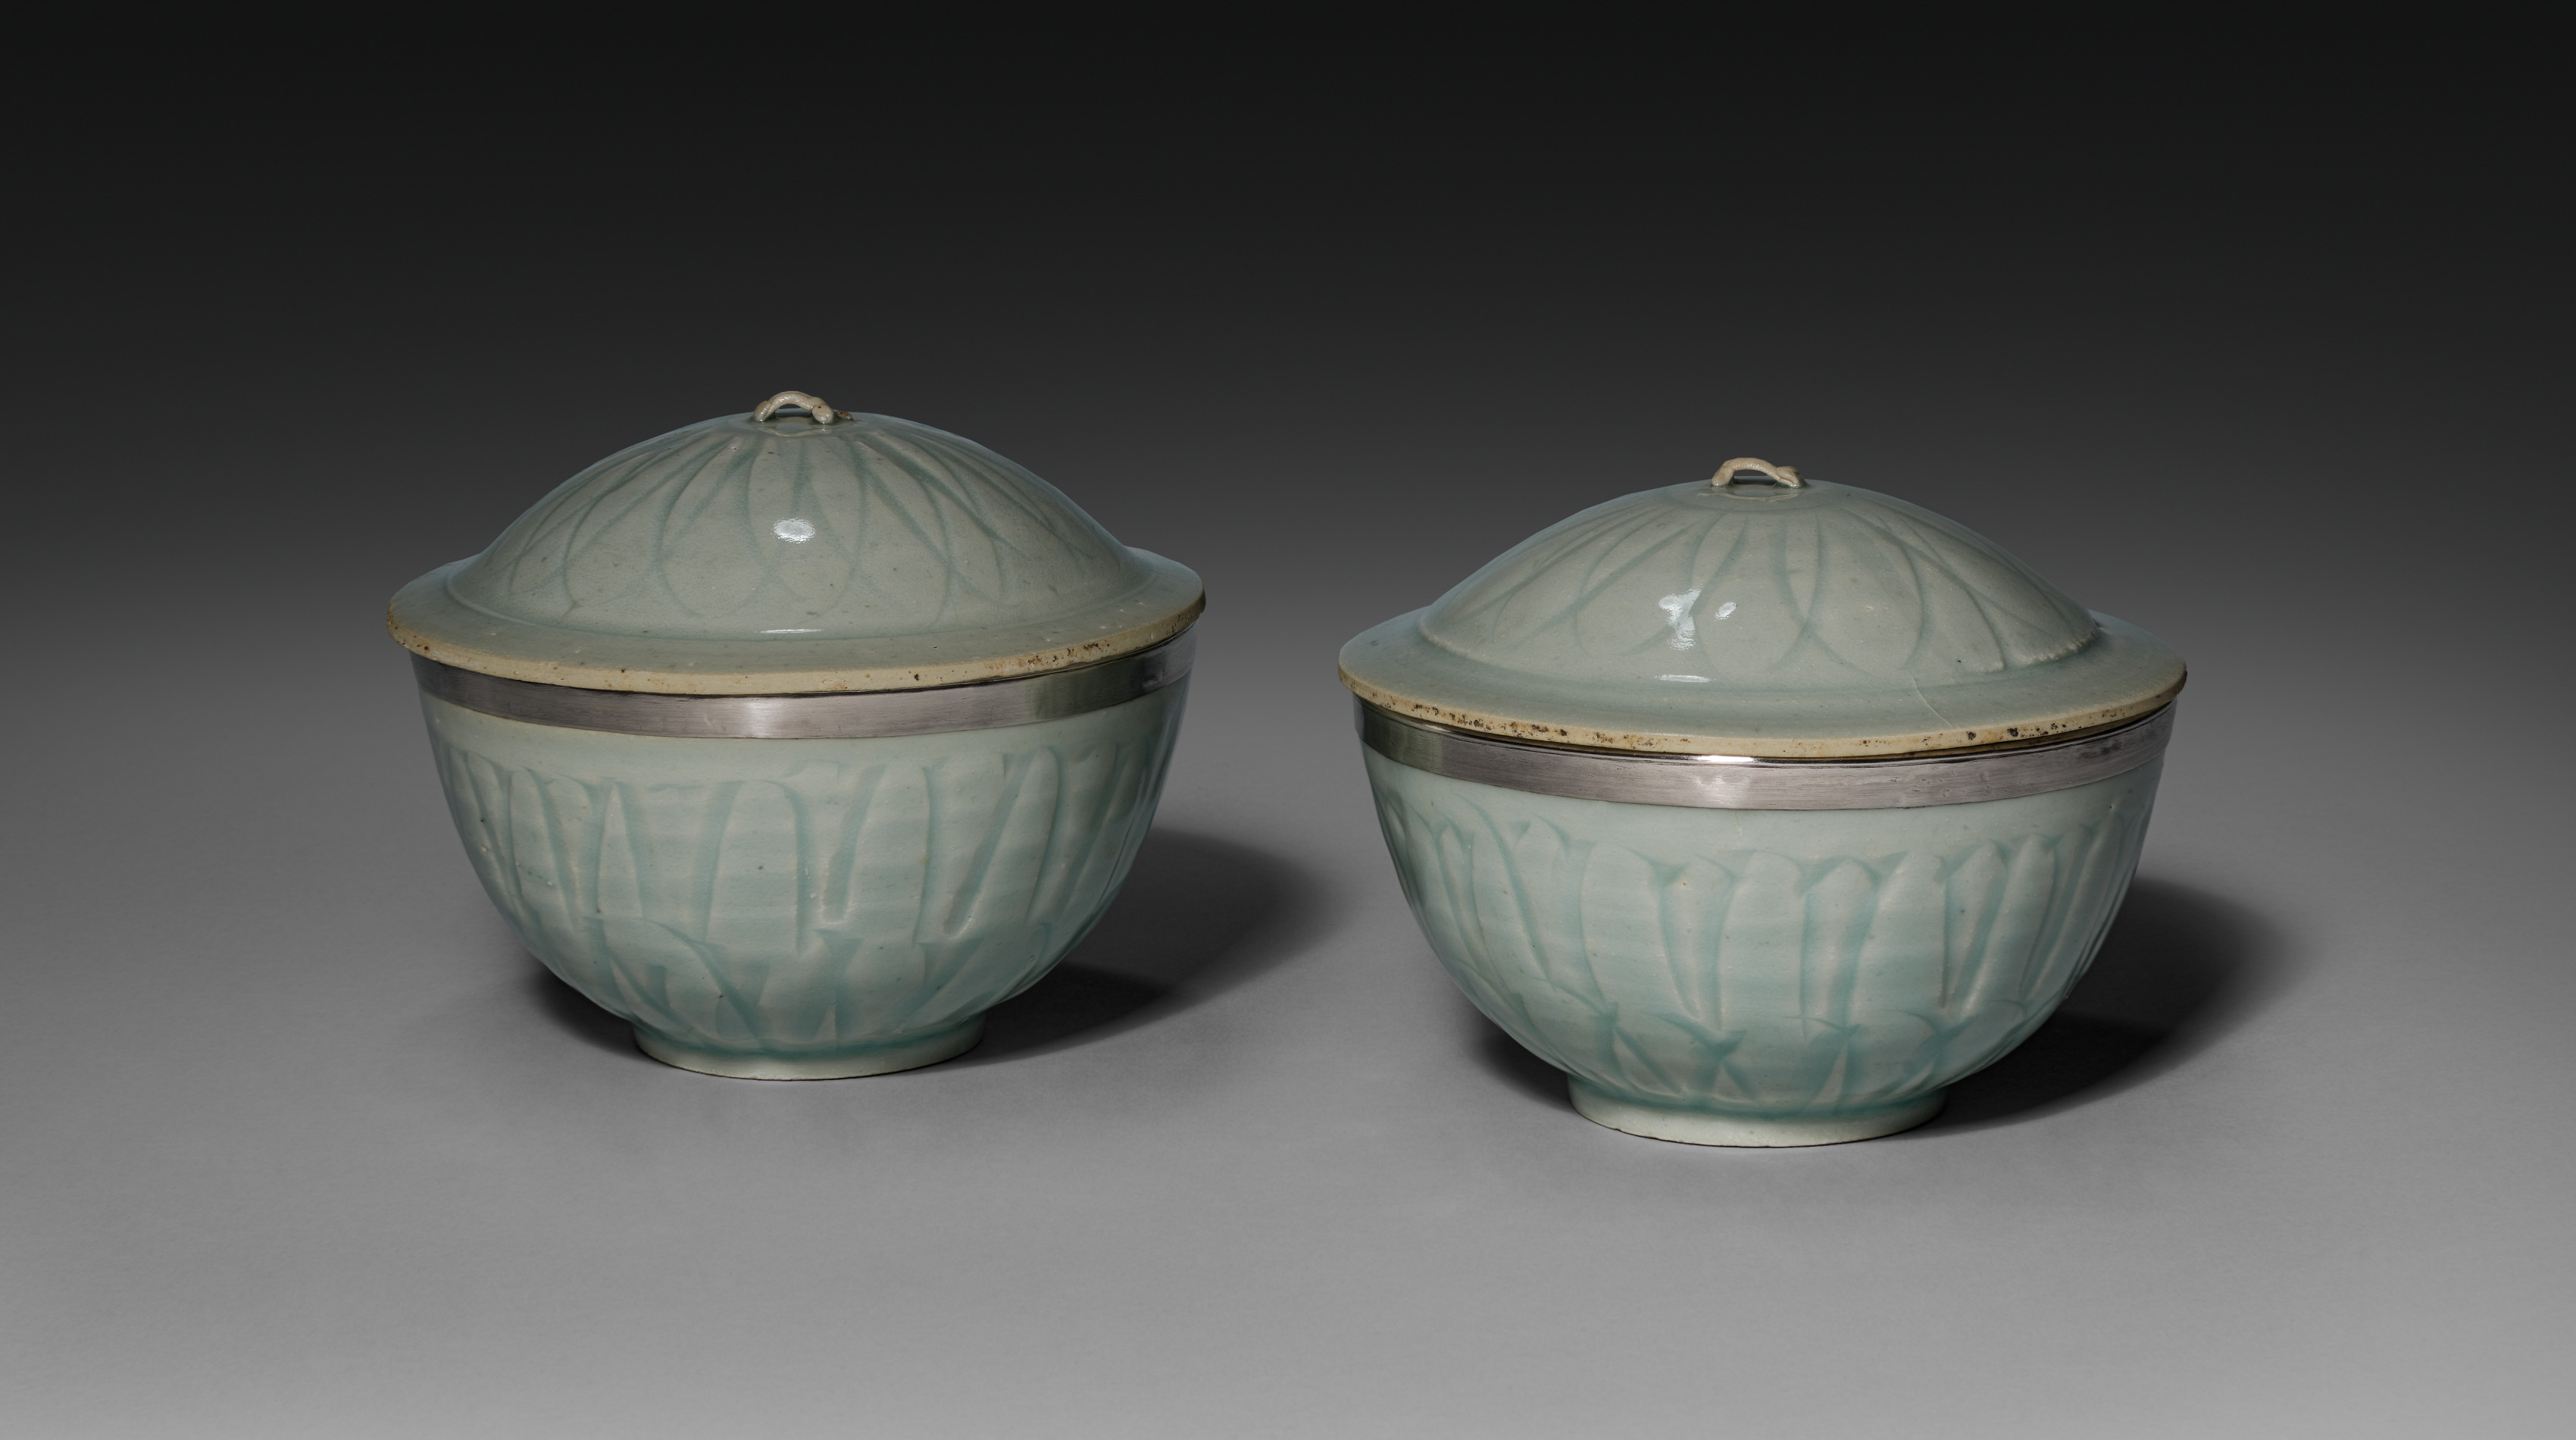 Pair of Qingbai Ware Bowls with Covers